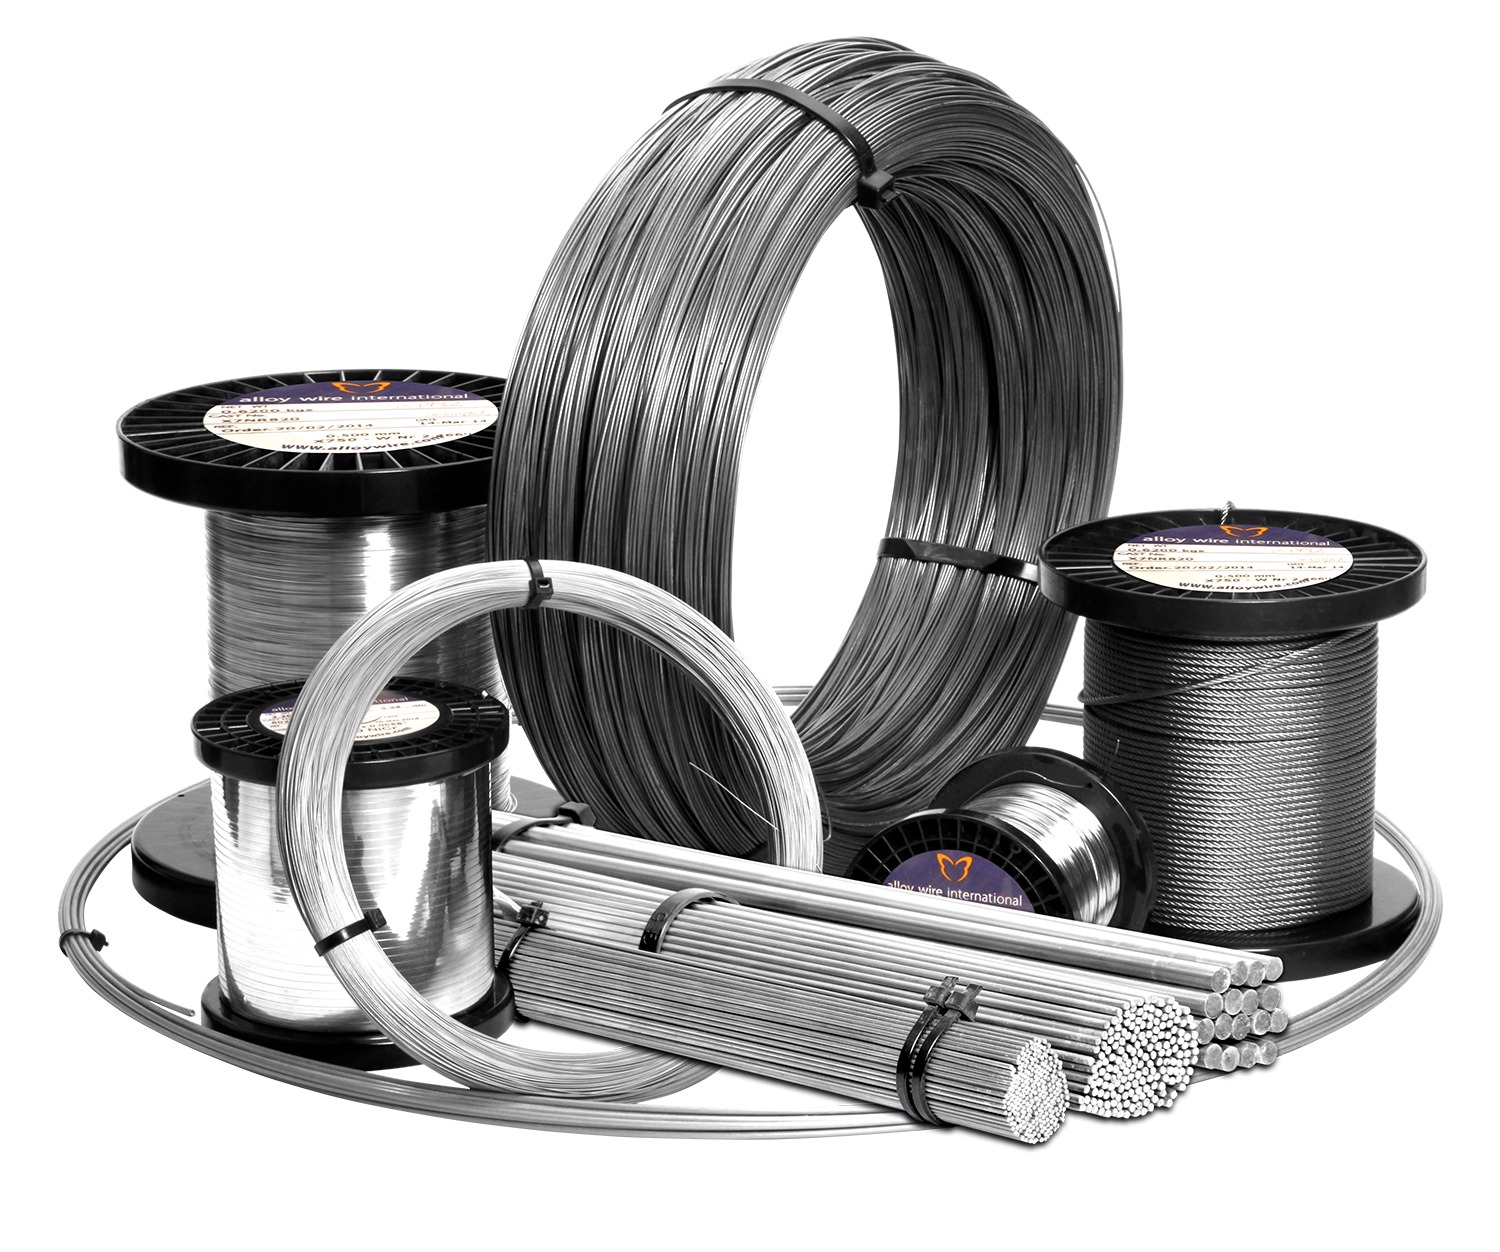 32 AWG 100 ft Nichrome 60 resistance wire.